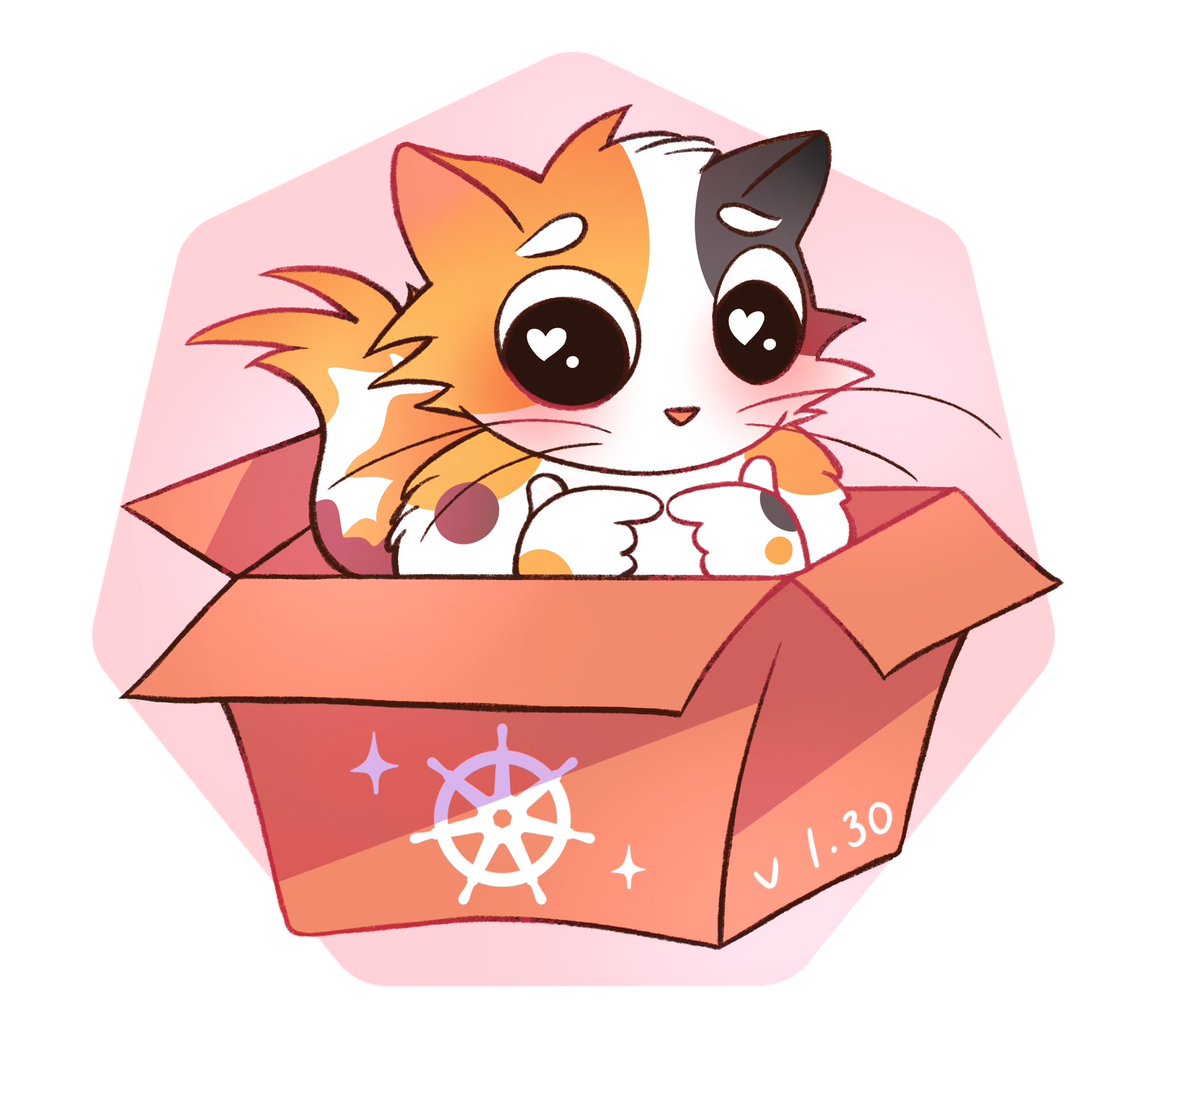 Fun fact! The Kubernetes v1.30: Uwubernetes logo is my cat, Espresso. She's 21 years old!